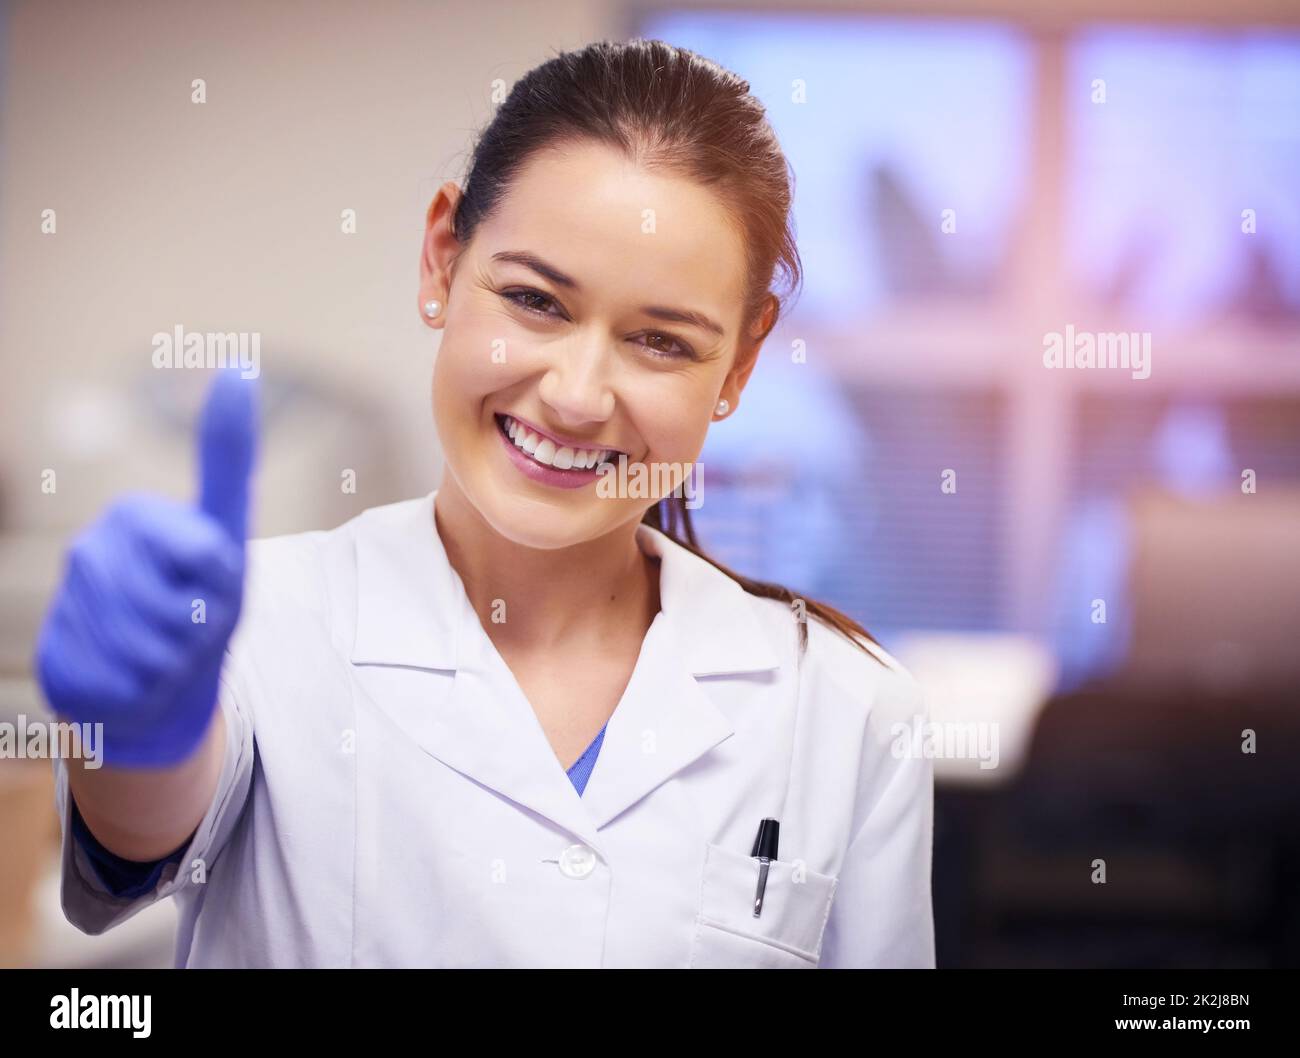 Ive just reached a major medical breakthrough. Portrait of a confident young scientist showing a thumbs up gesture in a laboratory. Stock Photo